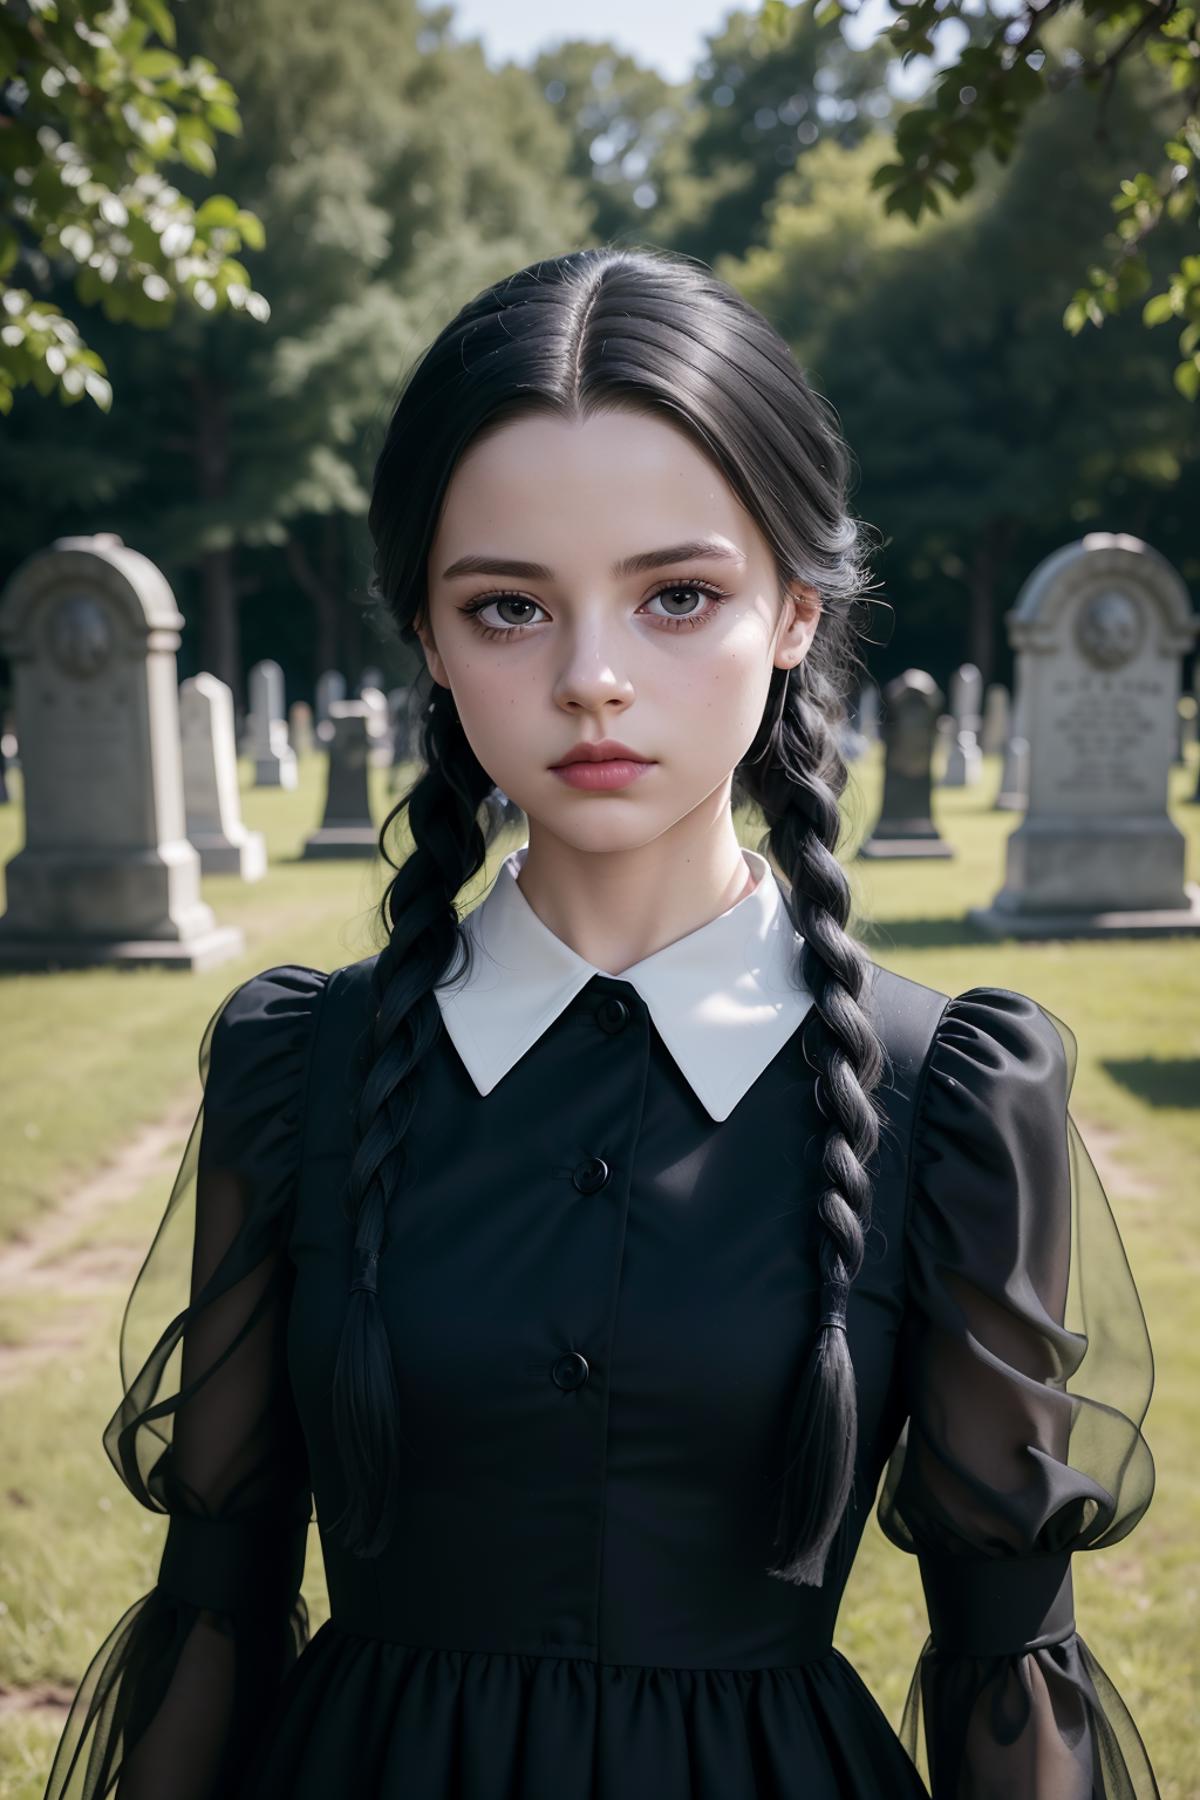 Wednesday Addams image by RubberDuckie